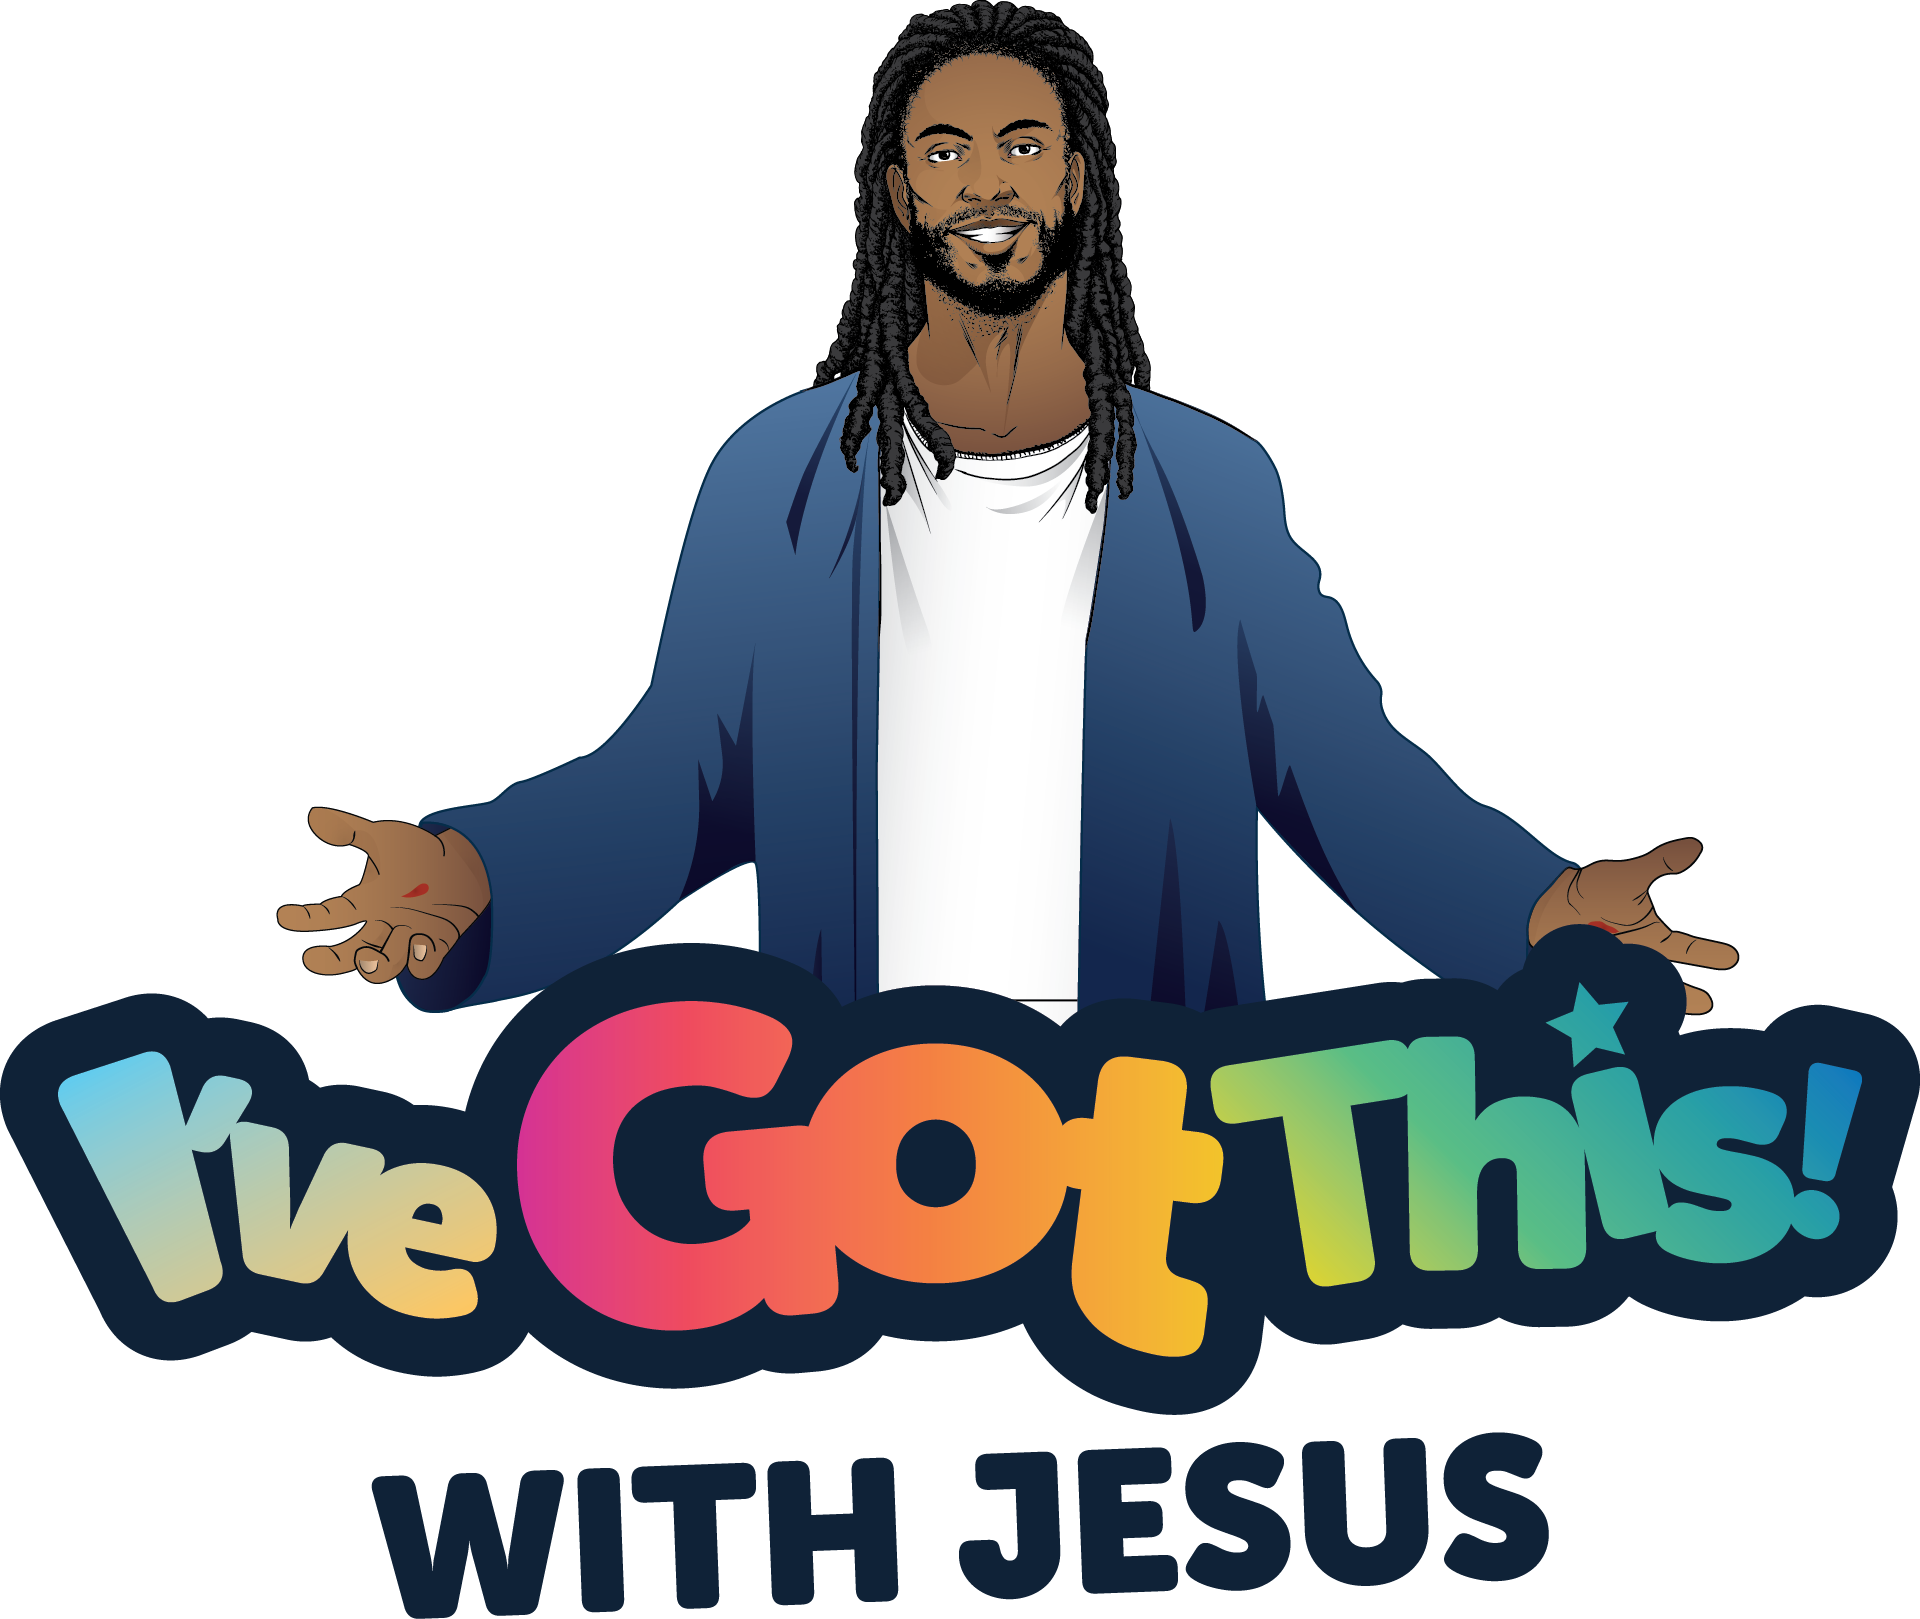 Theme: I've Got This with Jesus!